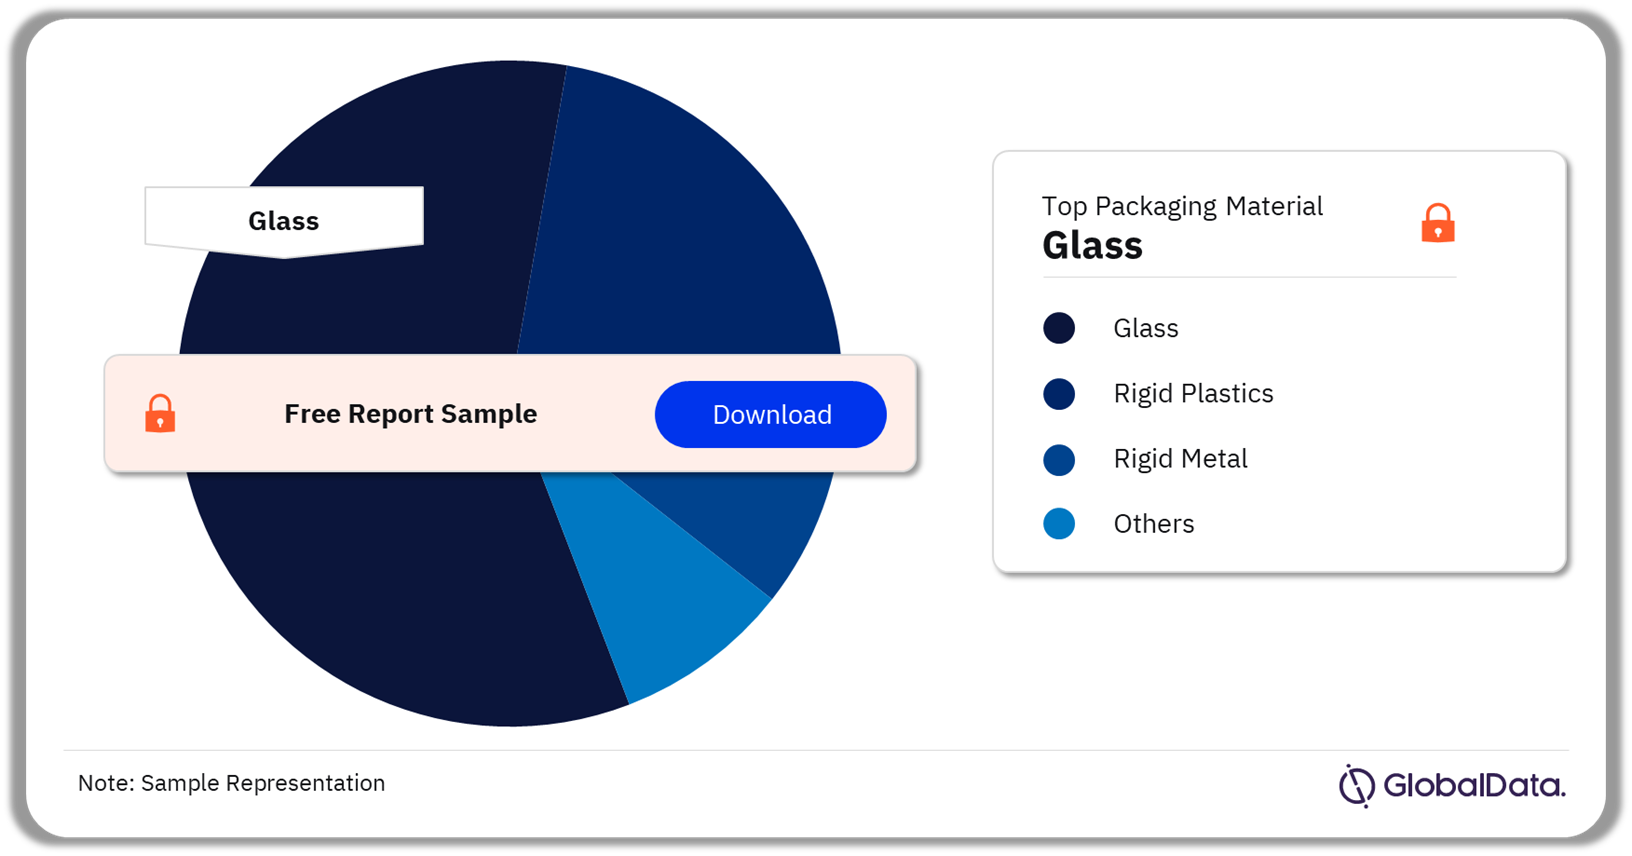 US Wine Market Analysis by Packaging Materials, 2021 (%)